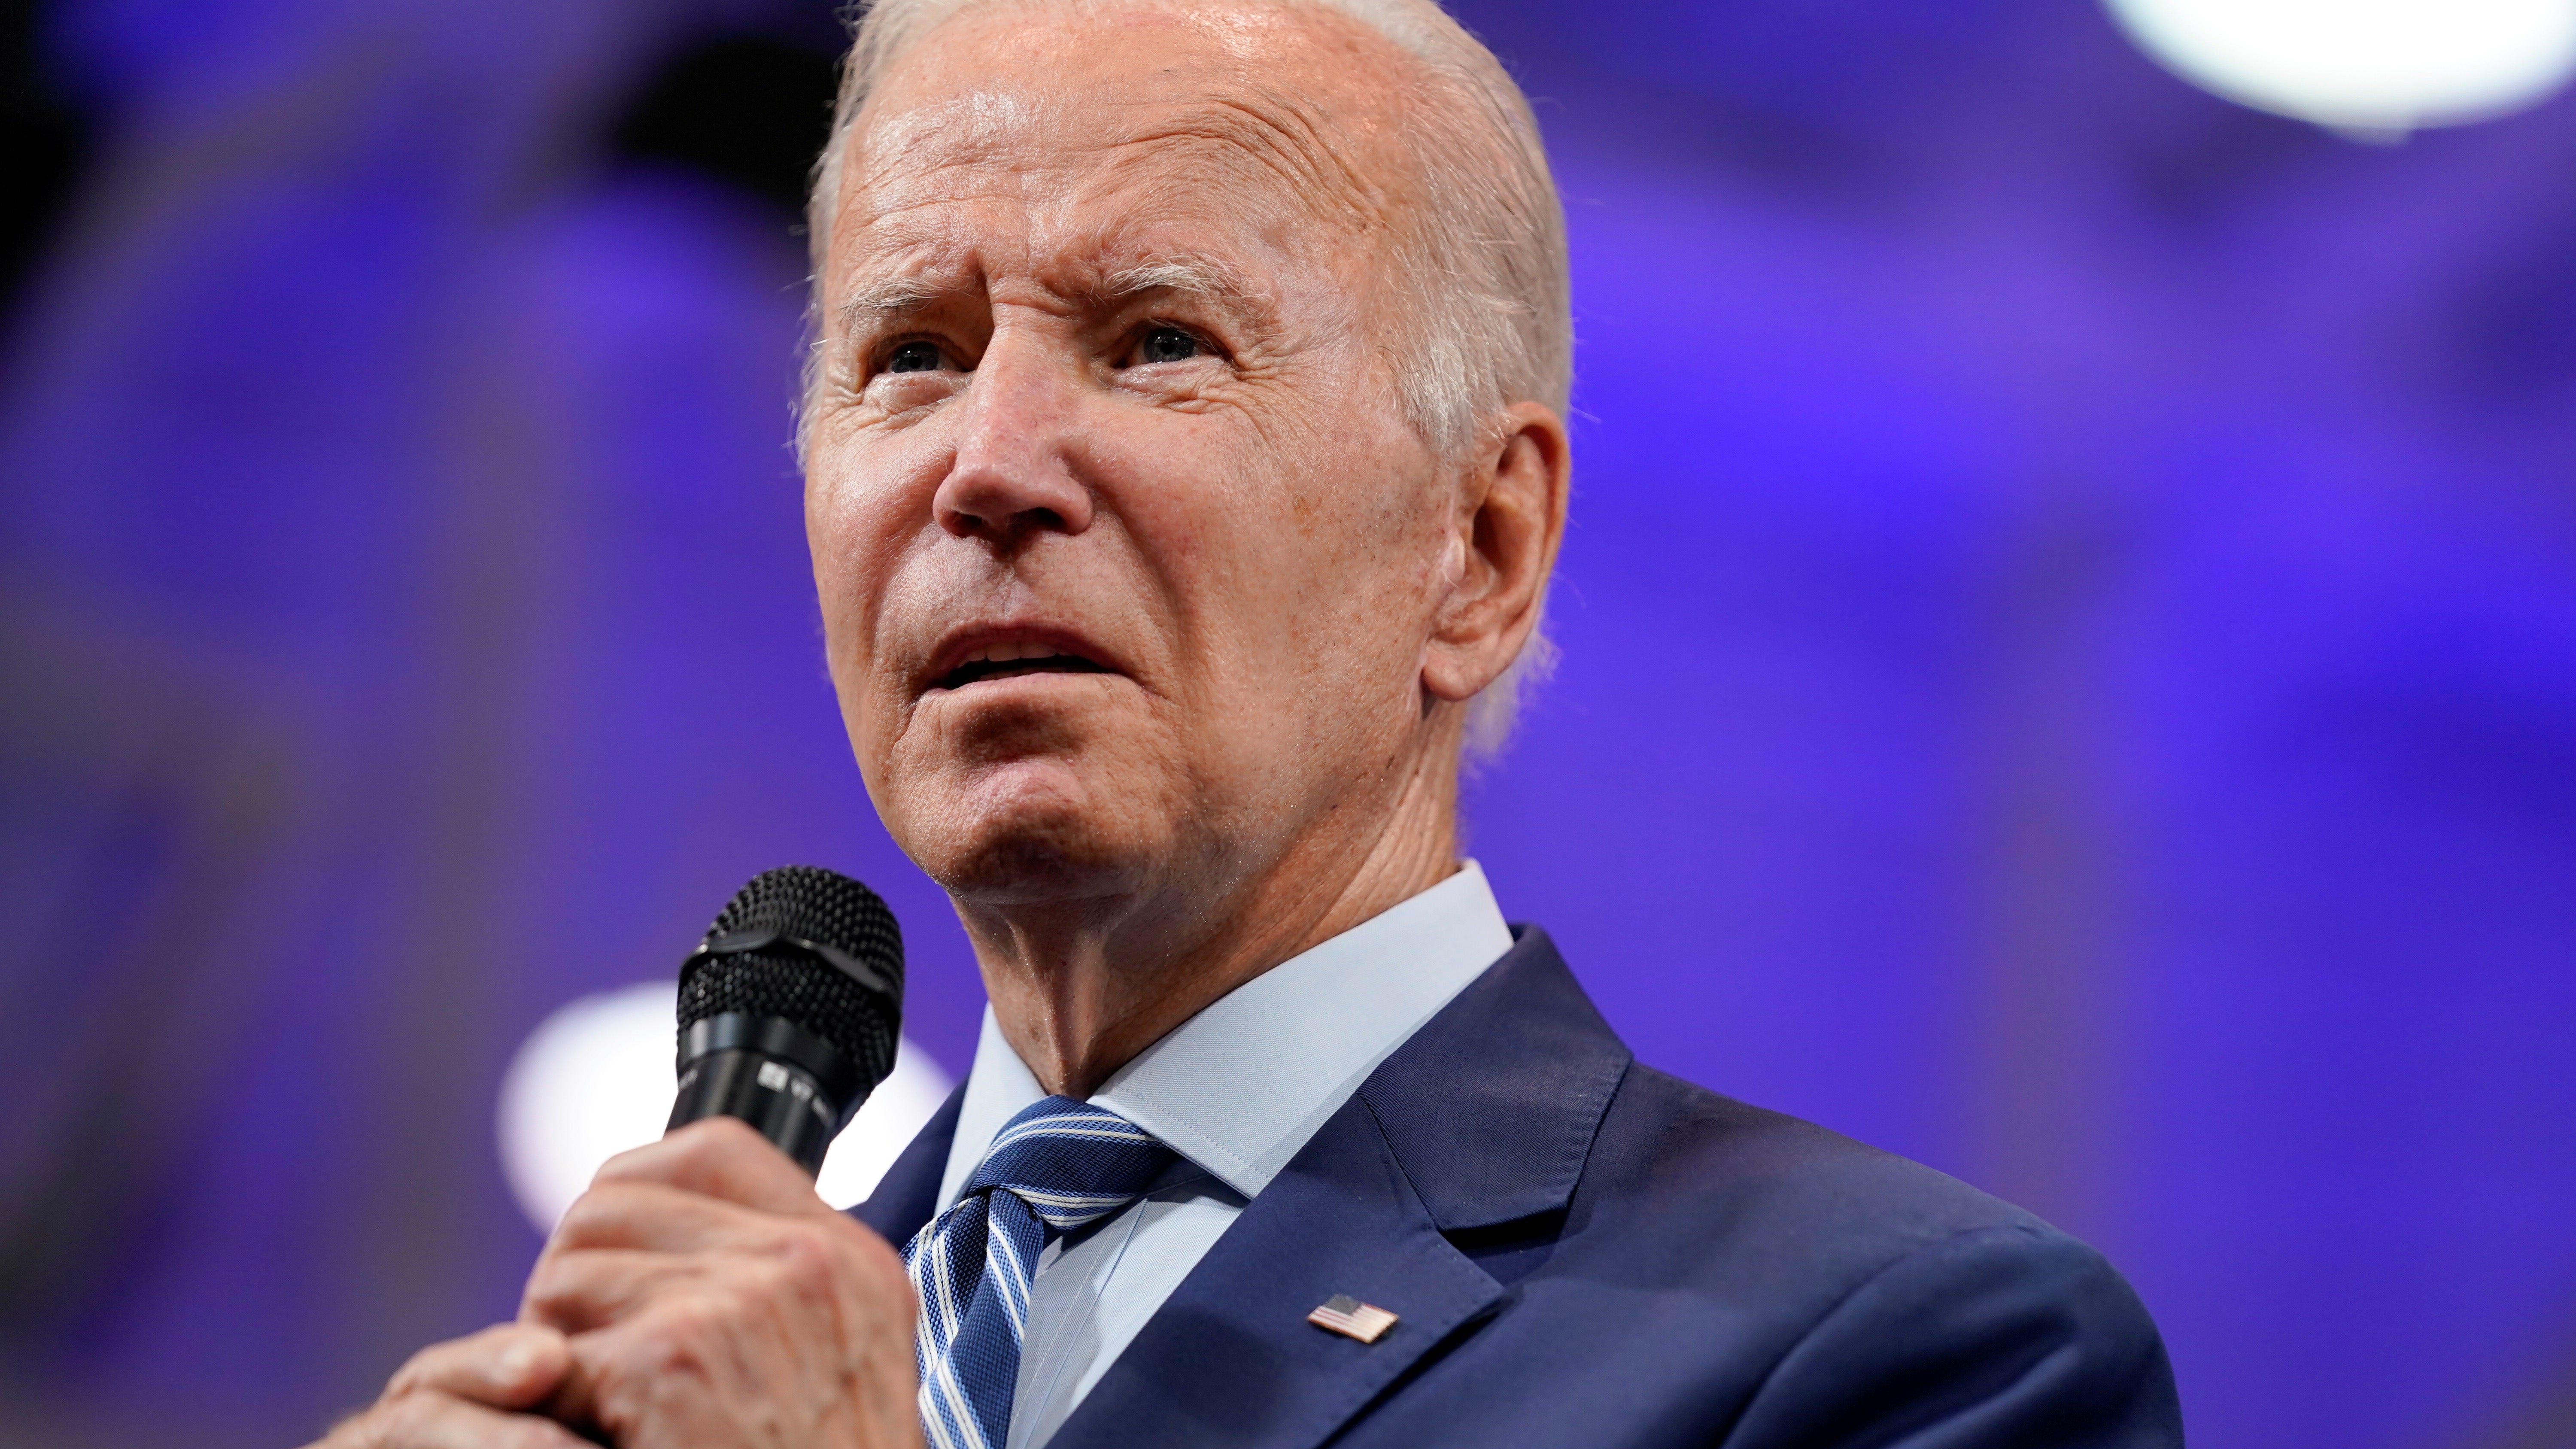 Biden shoots down Supreme Court expansion, says court could be politicized in ‘way that is not healthy’